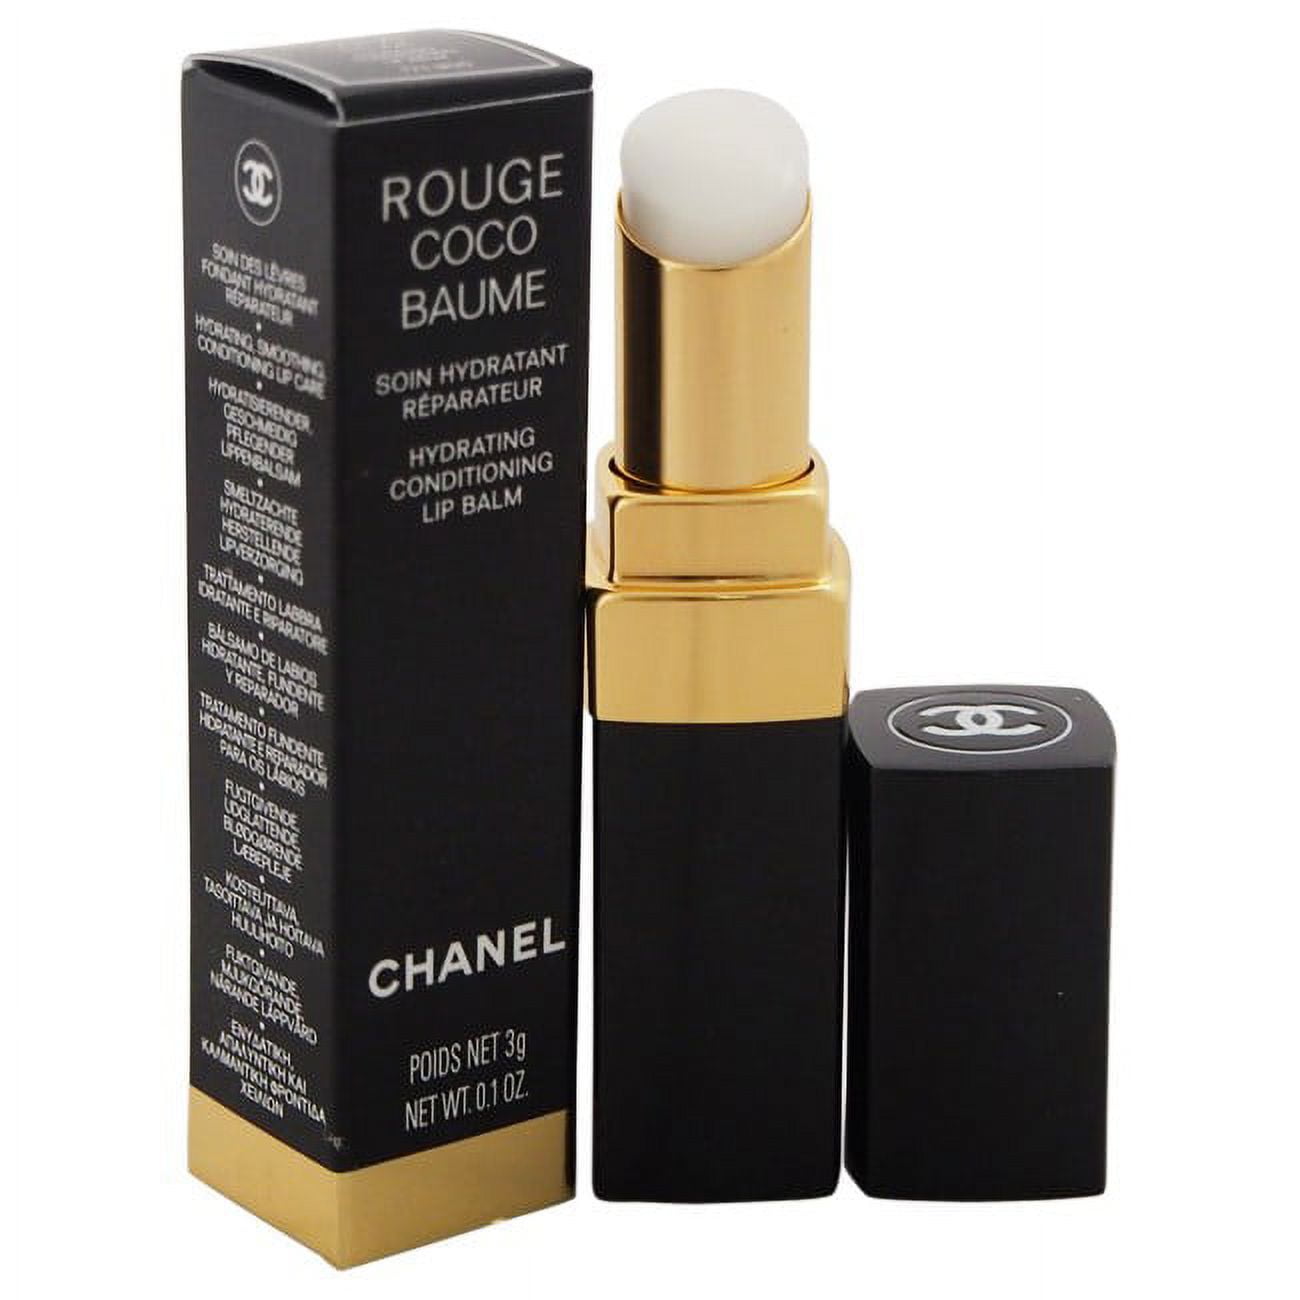 Chanel Rouge Coco Baume Hydrating Conditioning Lip Balm 0.1 oz